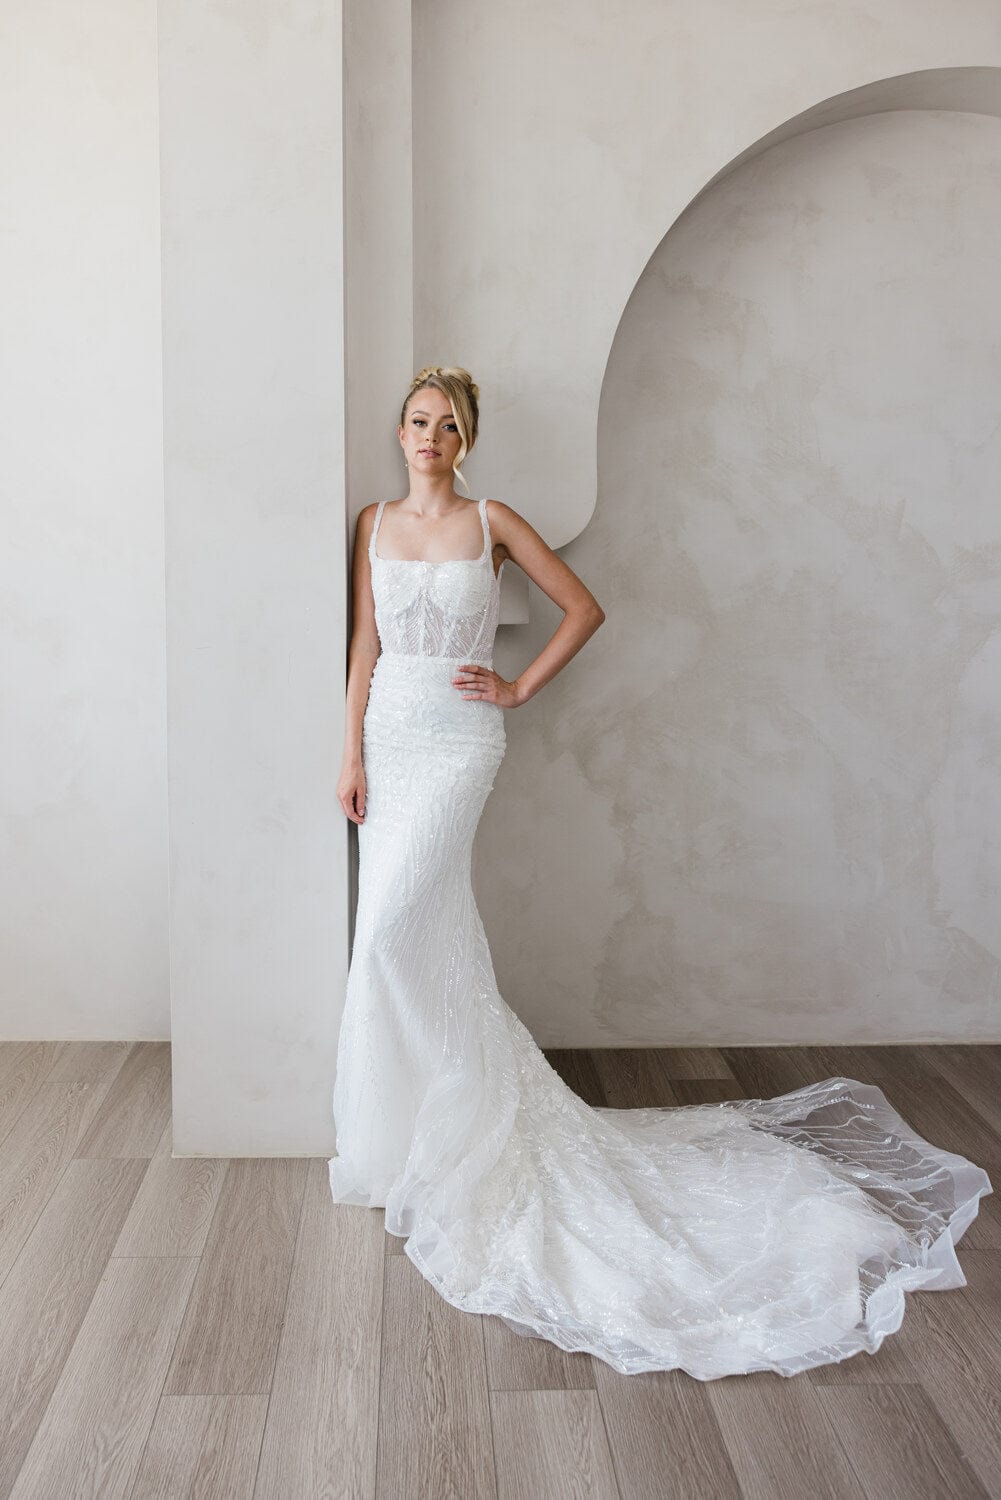 Mermaid Wedding Dresses in Auckland - Dell'Amore Bridal